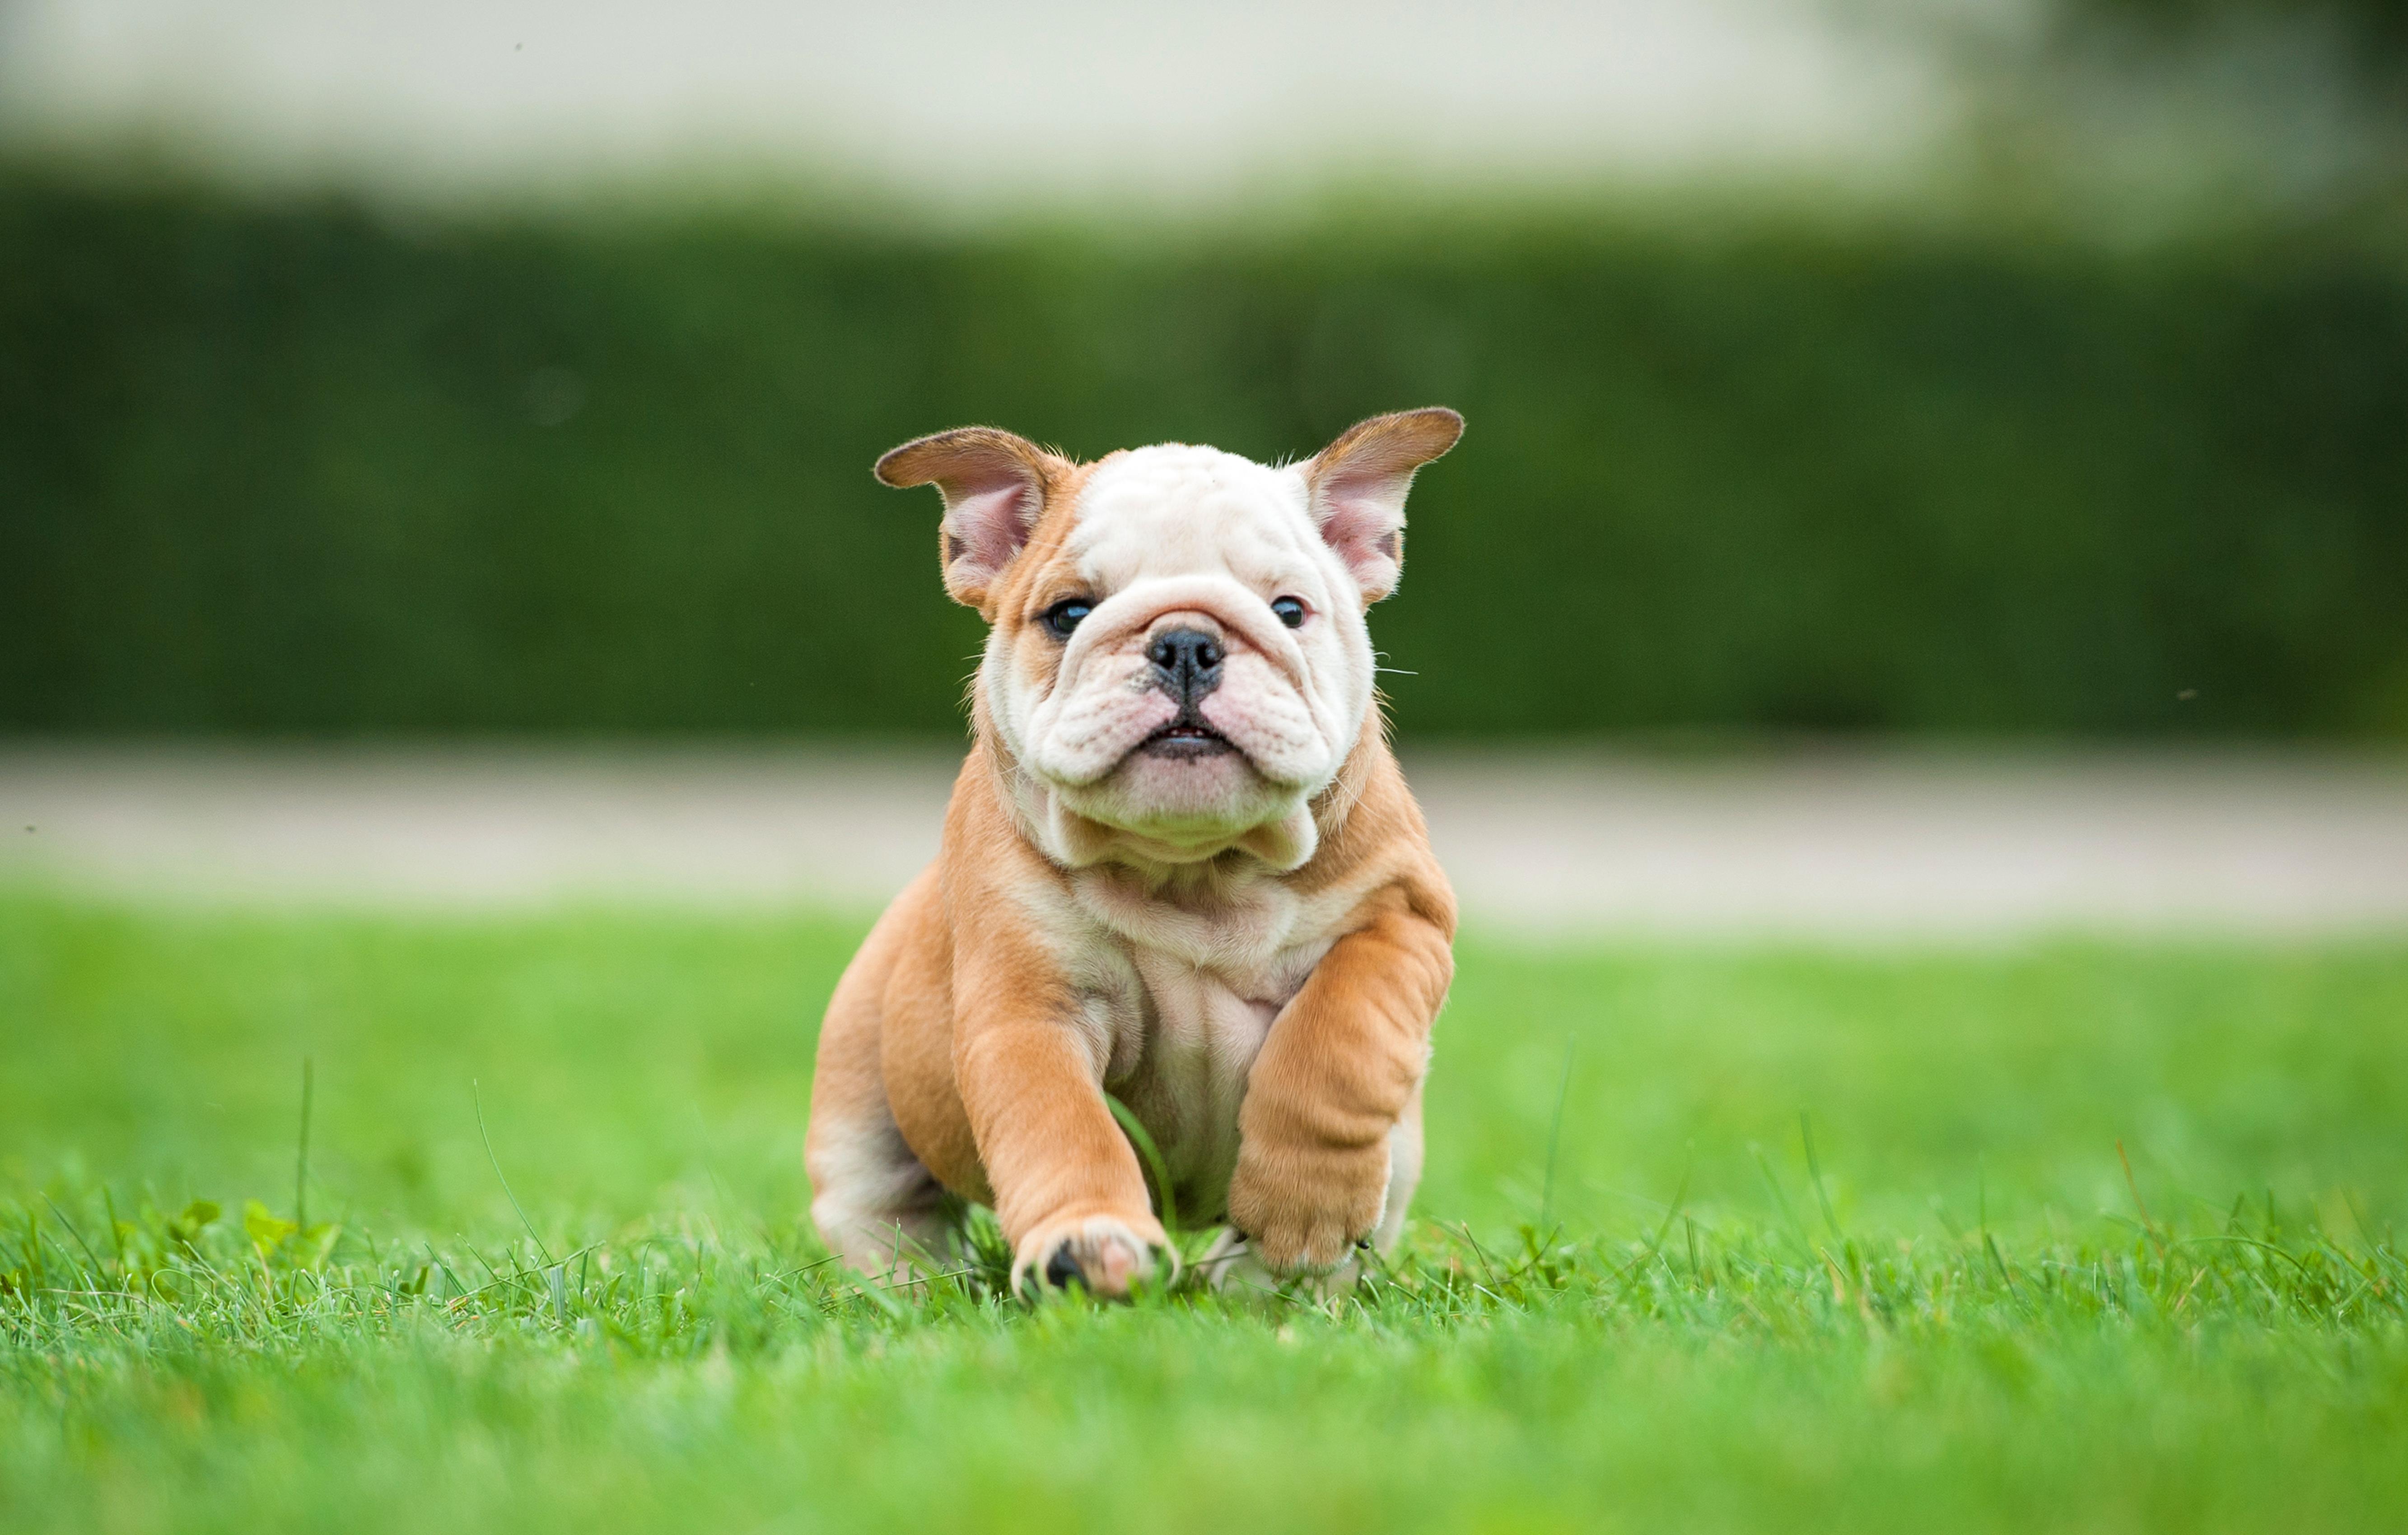 Why is your dog scratching excessively?